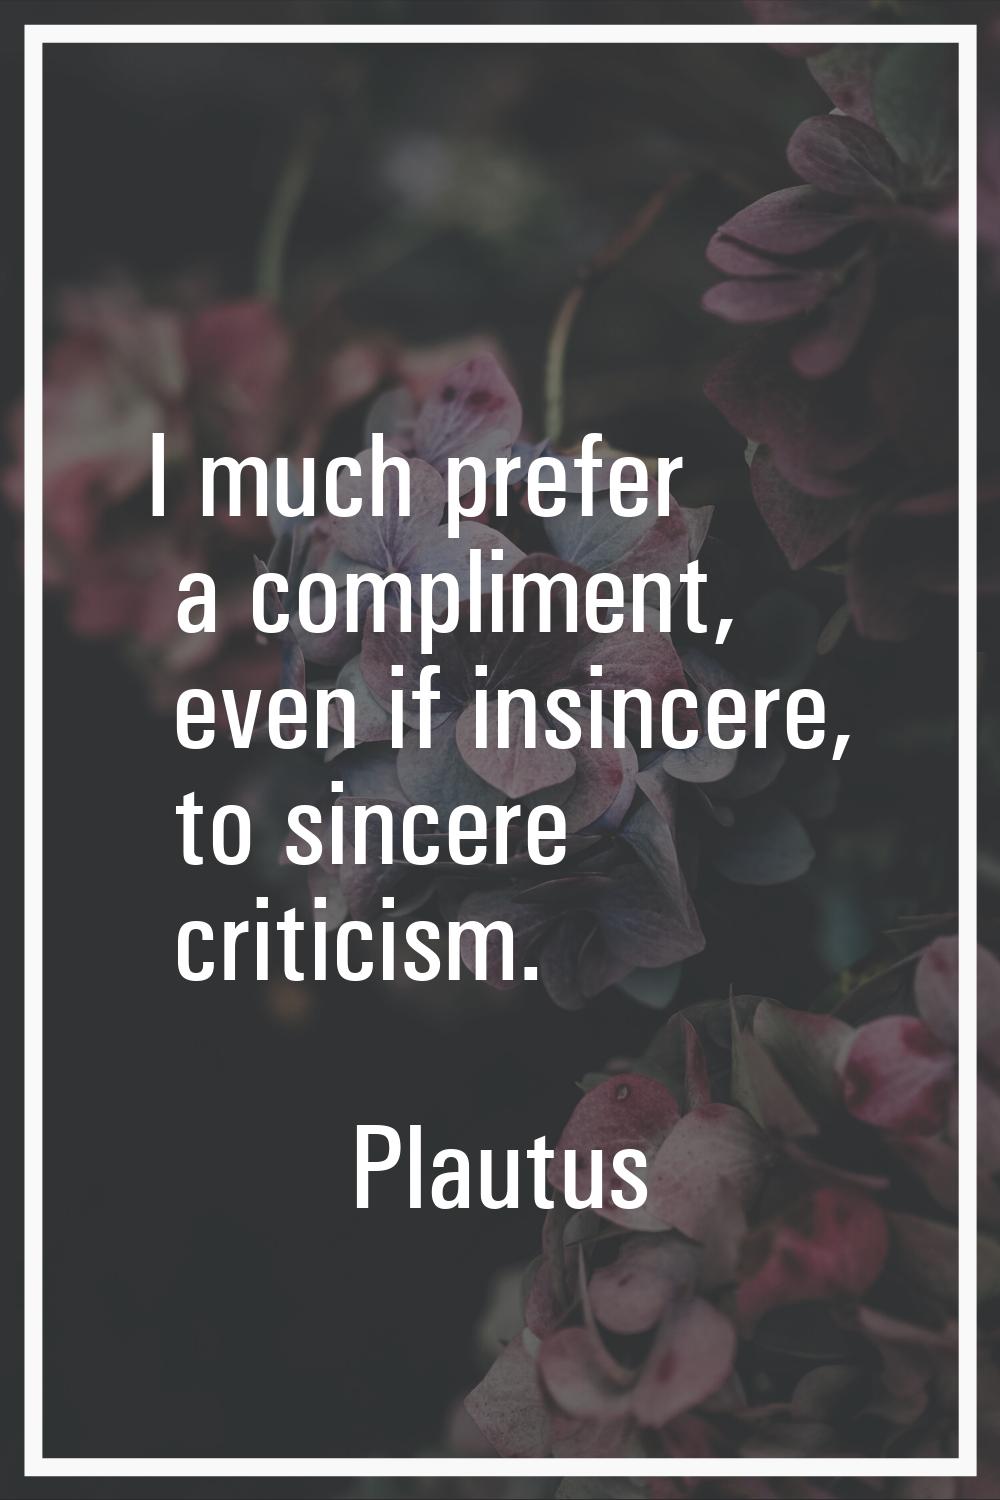 I much prefer a compliment, even if insincere, to sincere criticism.